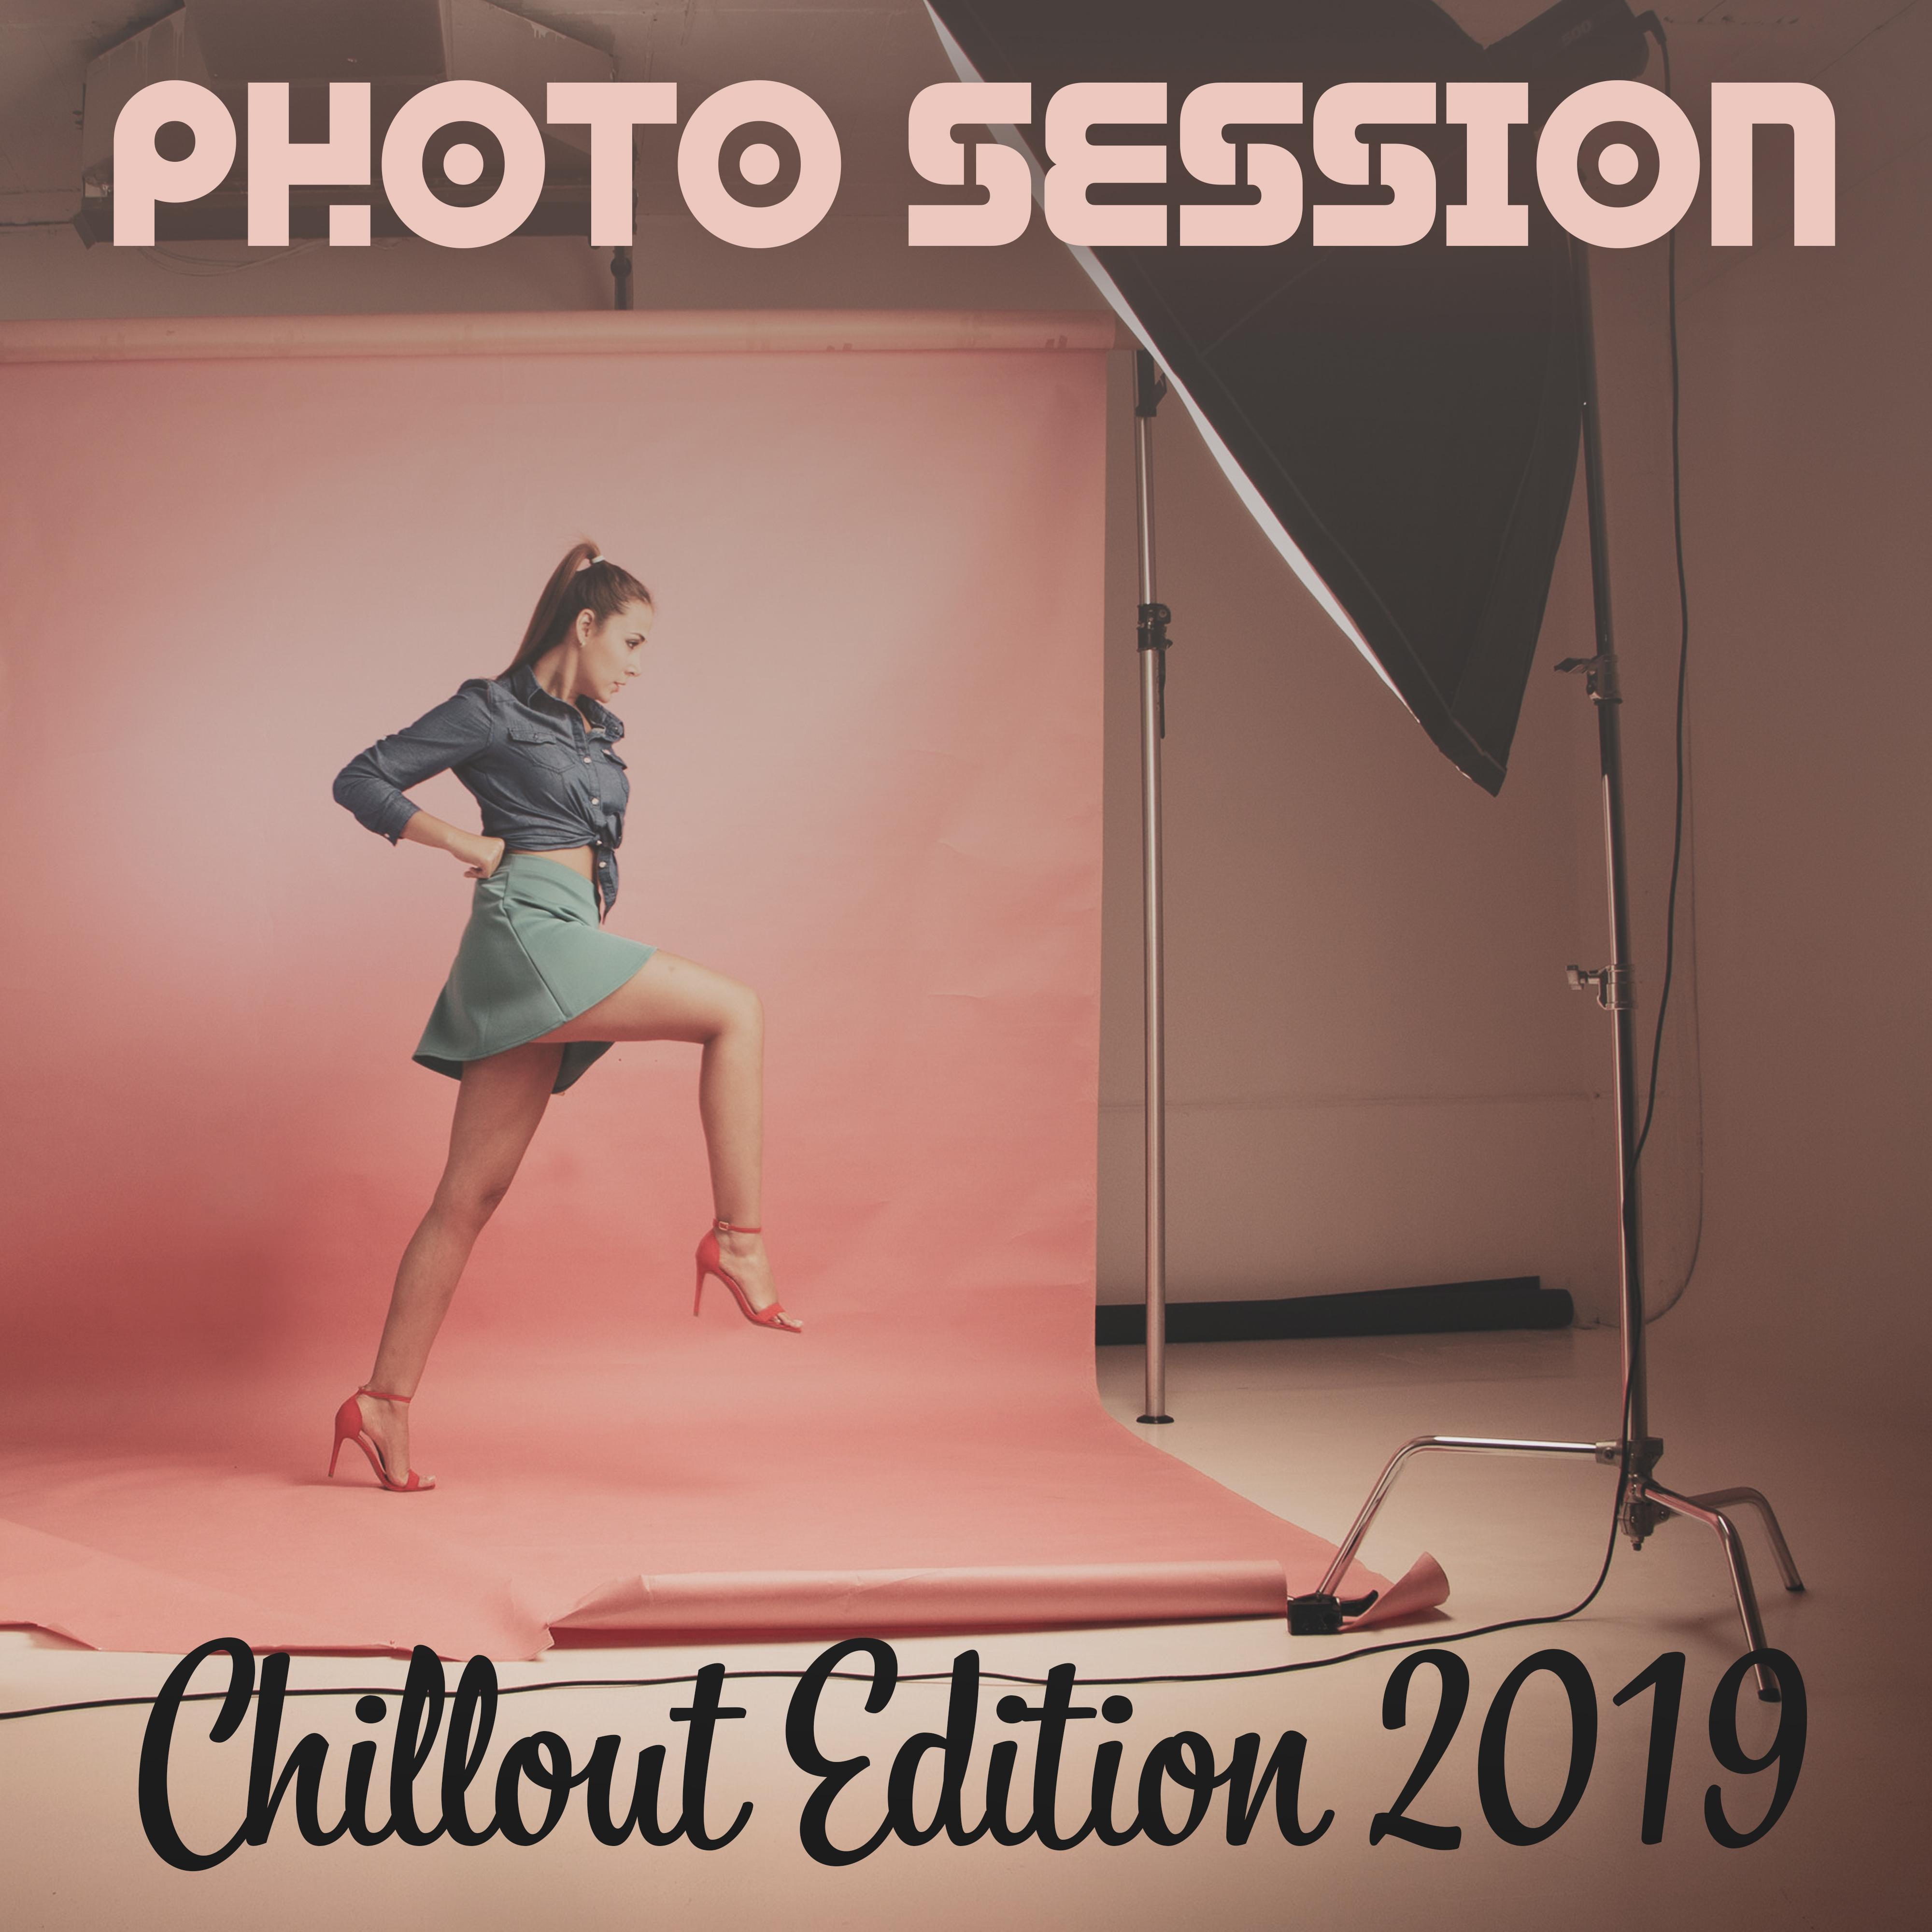 Photo Session – Chillout Edition 2019